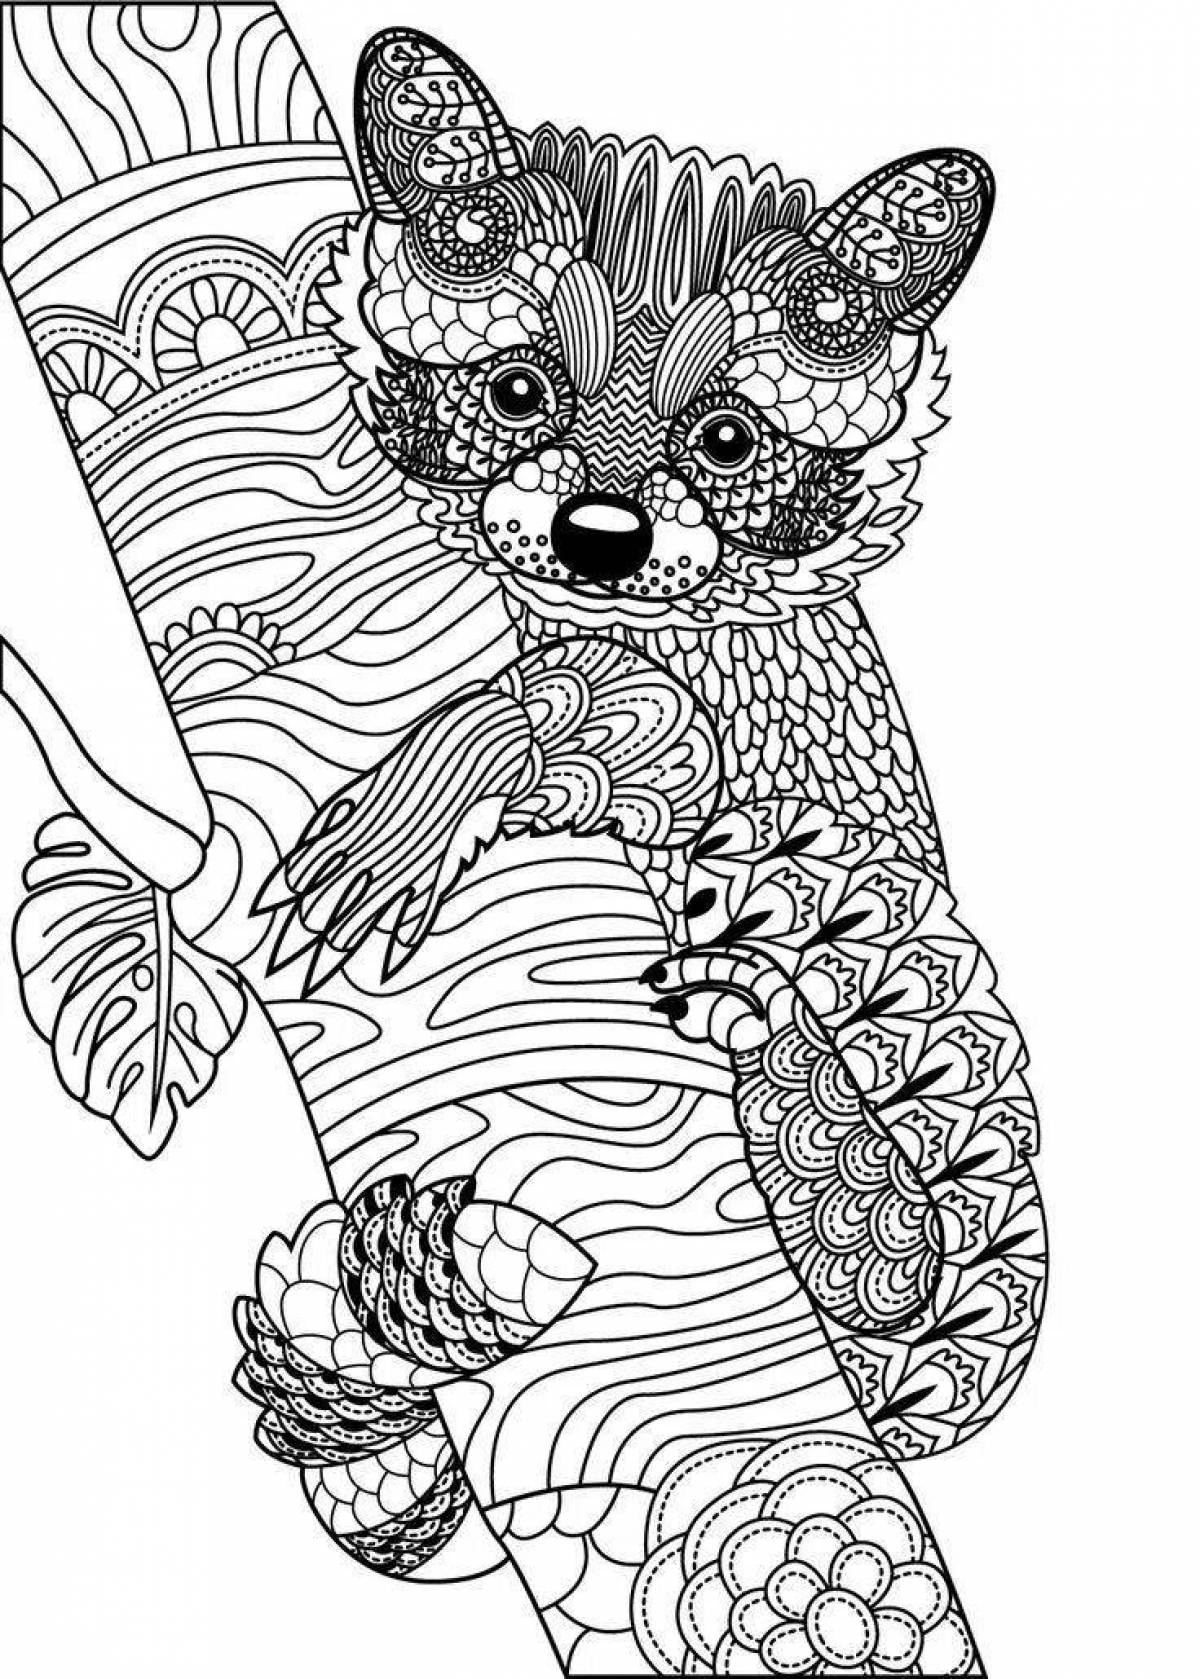 Radiant coloring page beautiful animals